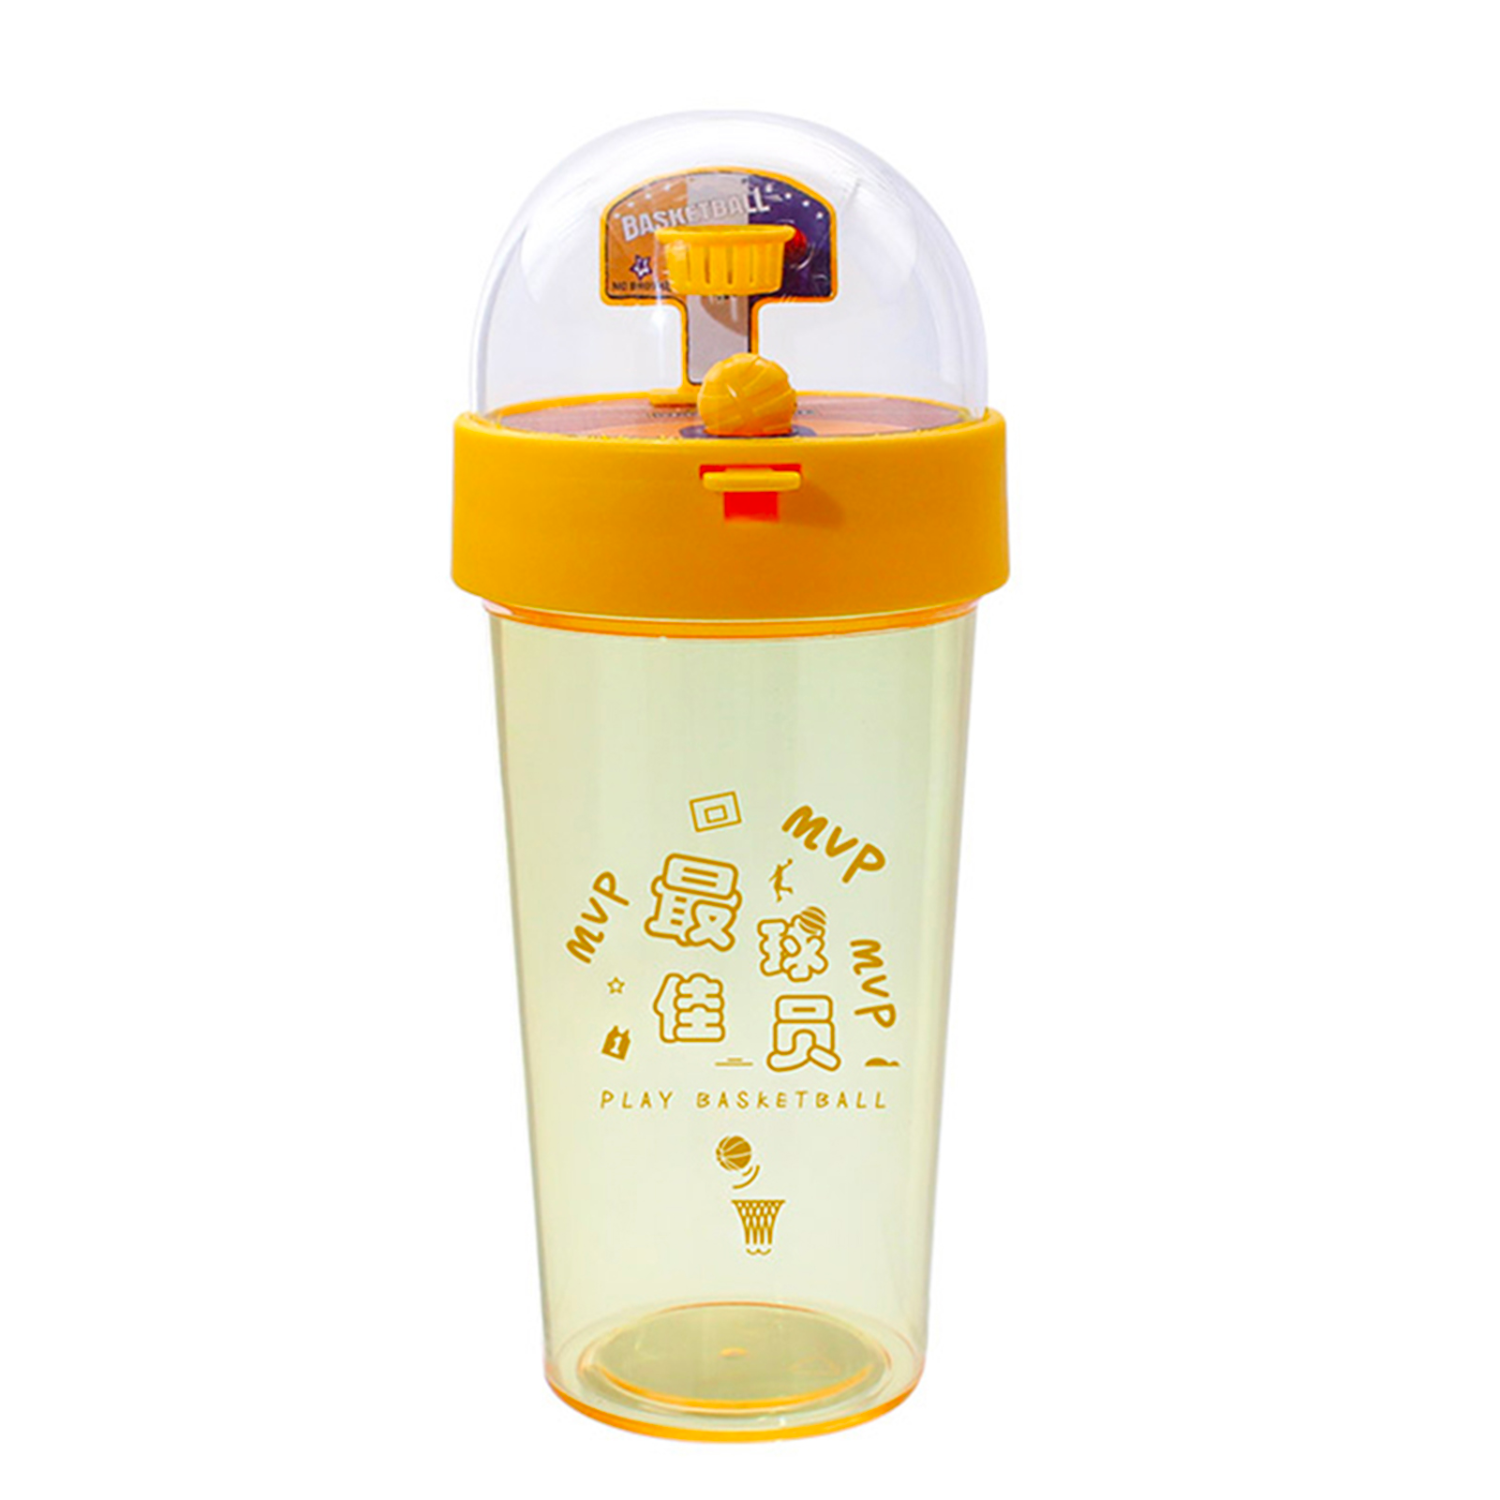 500ml Water bottle Creative Shooting Basket Water Bottle Water Cup Eco friendly Large Capacity Portable Basketball Game Plastic Water Cup Large Capacity Student Sports Water Bottles